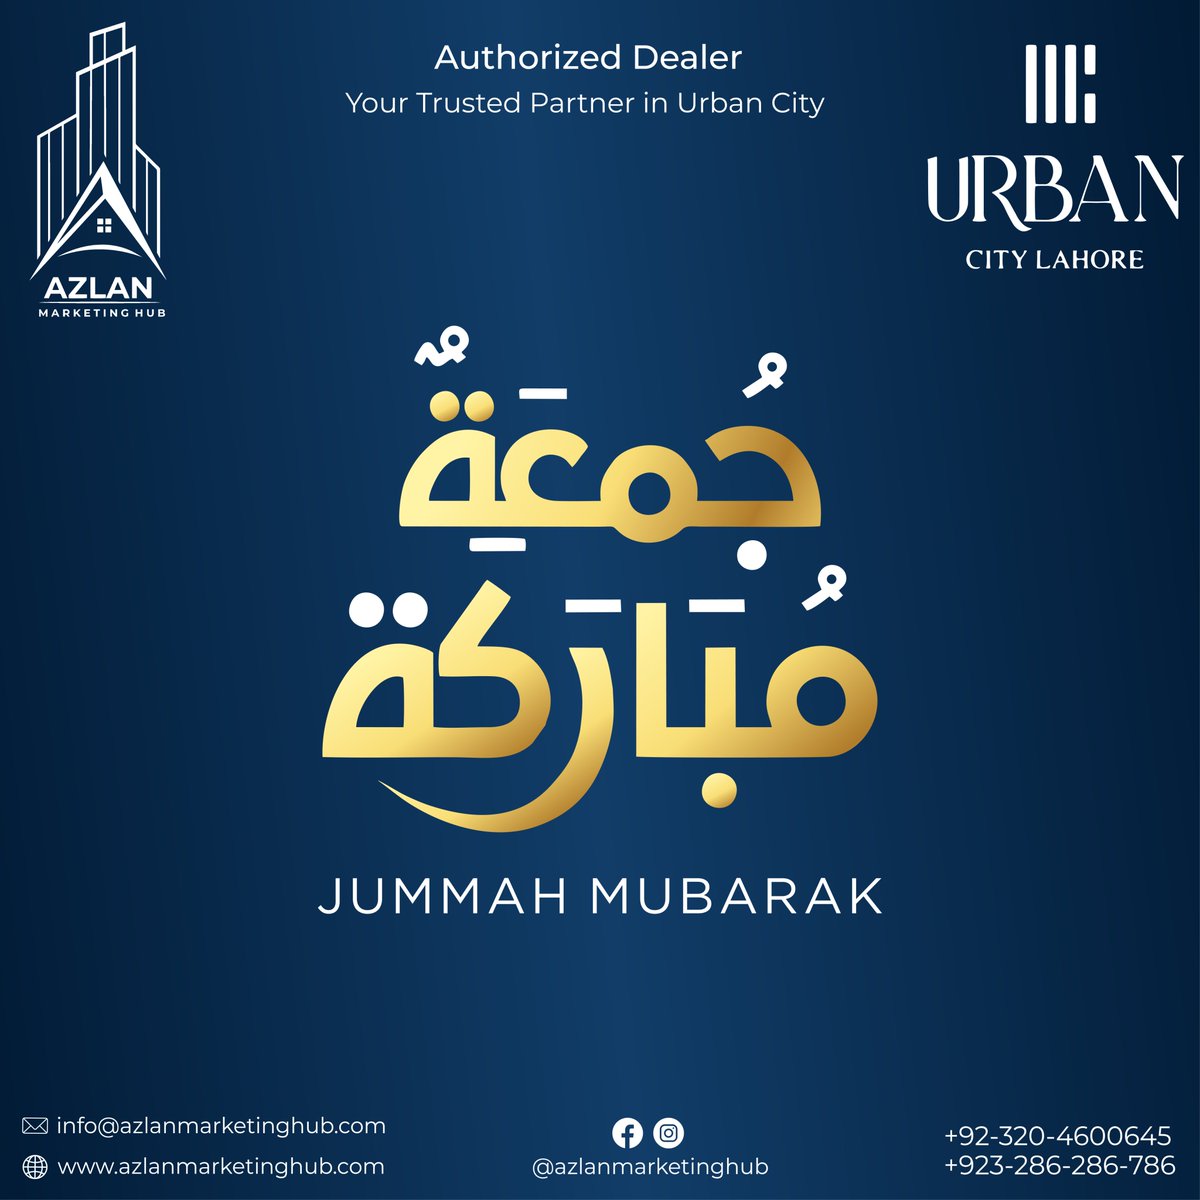 Jumma Mubarak! 🌟 Azlan Marketing Hub wishes you a joyful day ahead. 🌼 We are here to assist you in achieving your business and property goals. 💼 #HappyFriday  #AzlanMarketingHub #PropertyGoals #UrbanCity #RealEstate #DreamsComeTrue